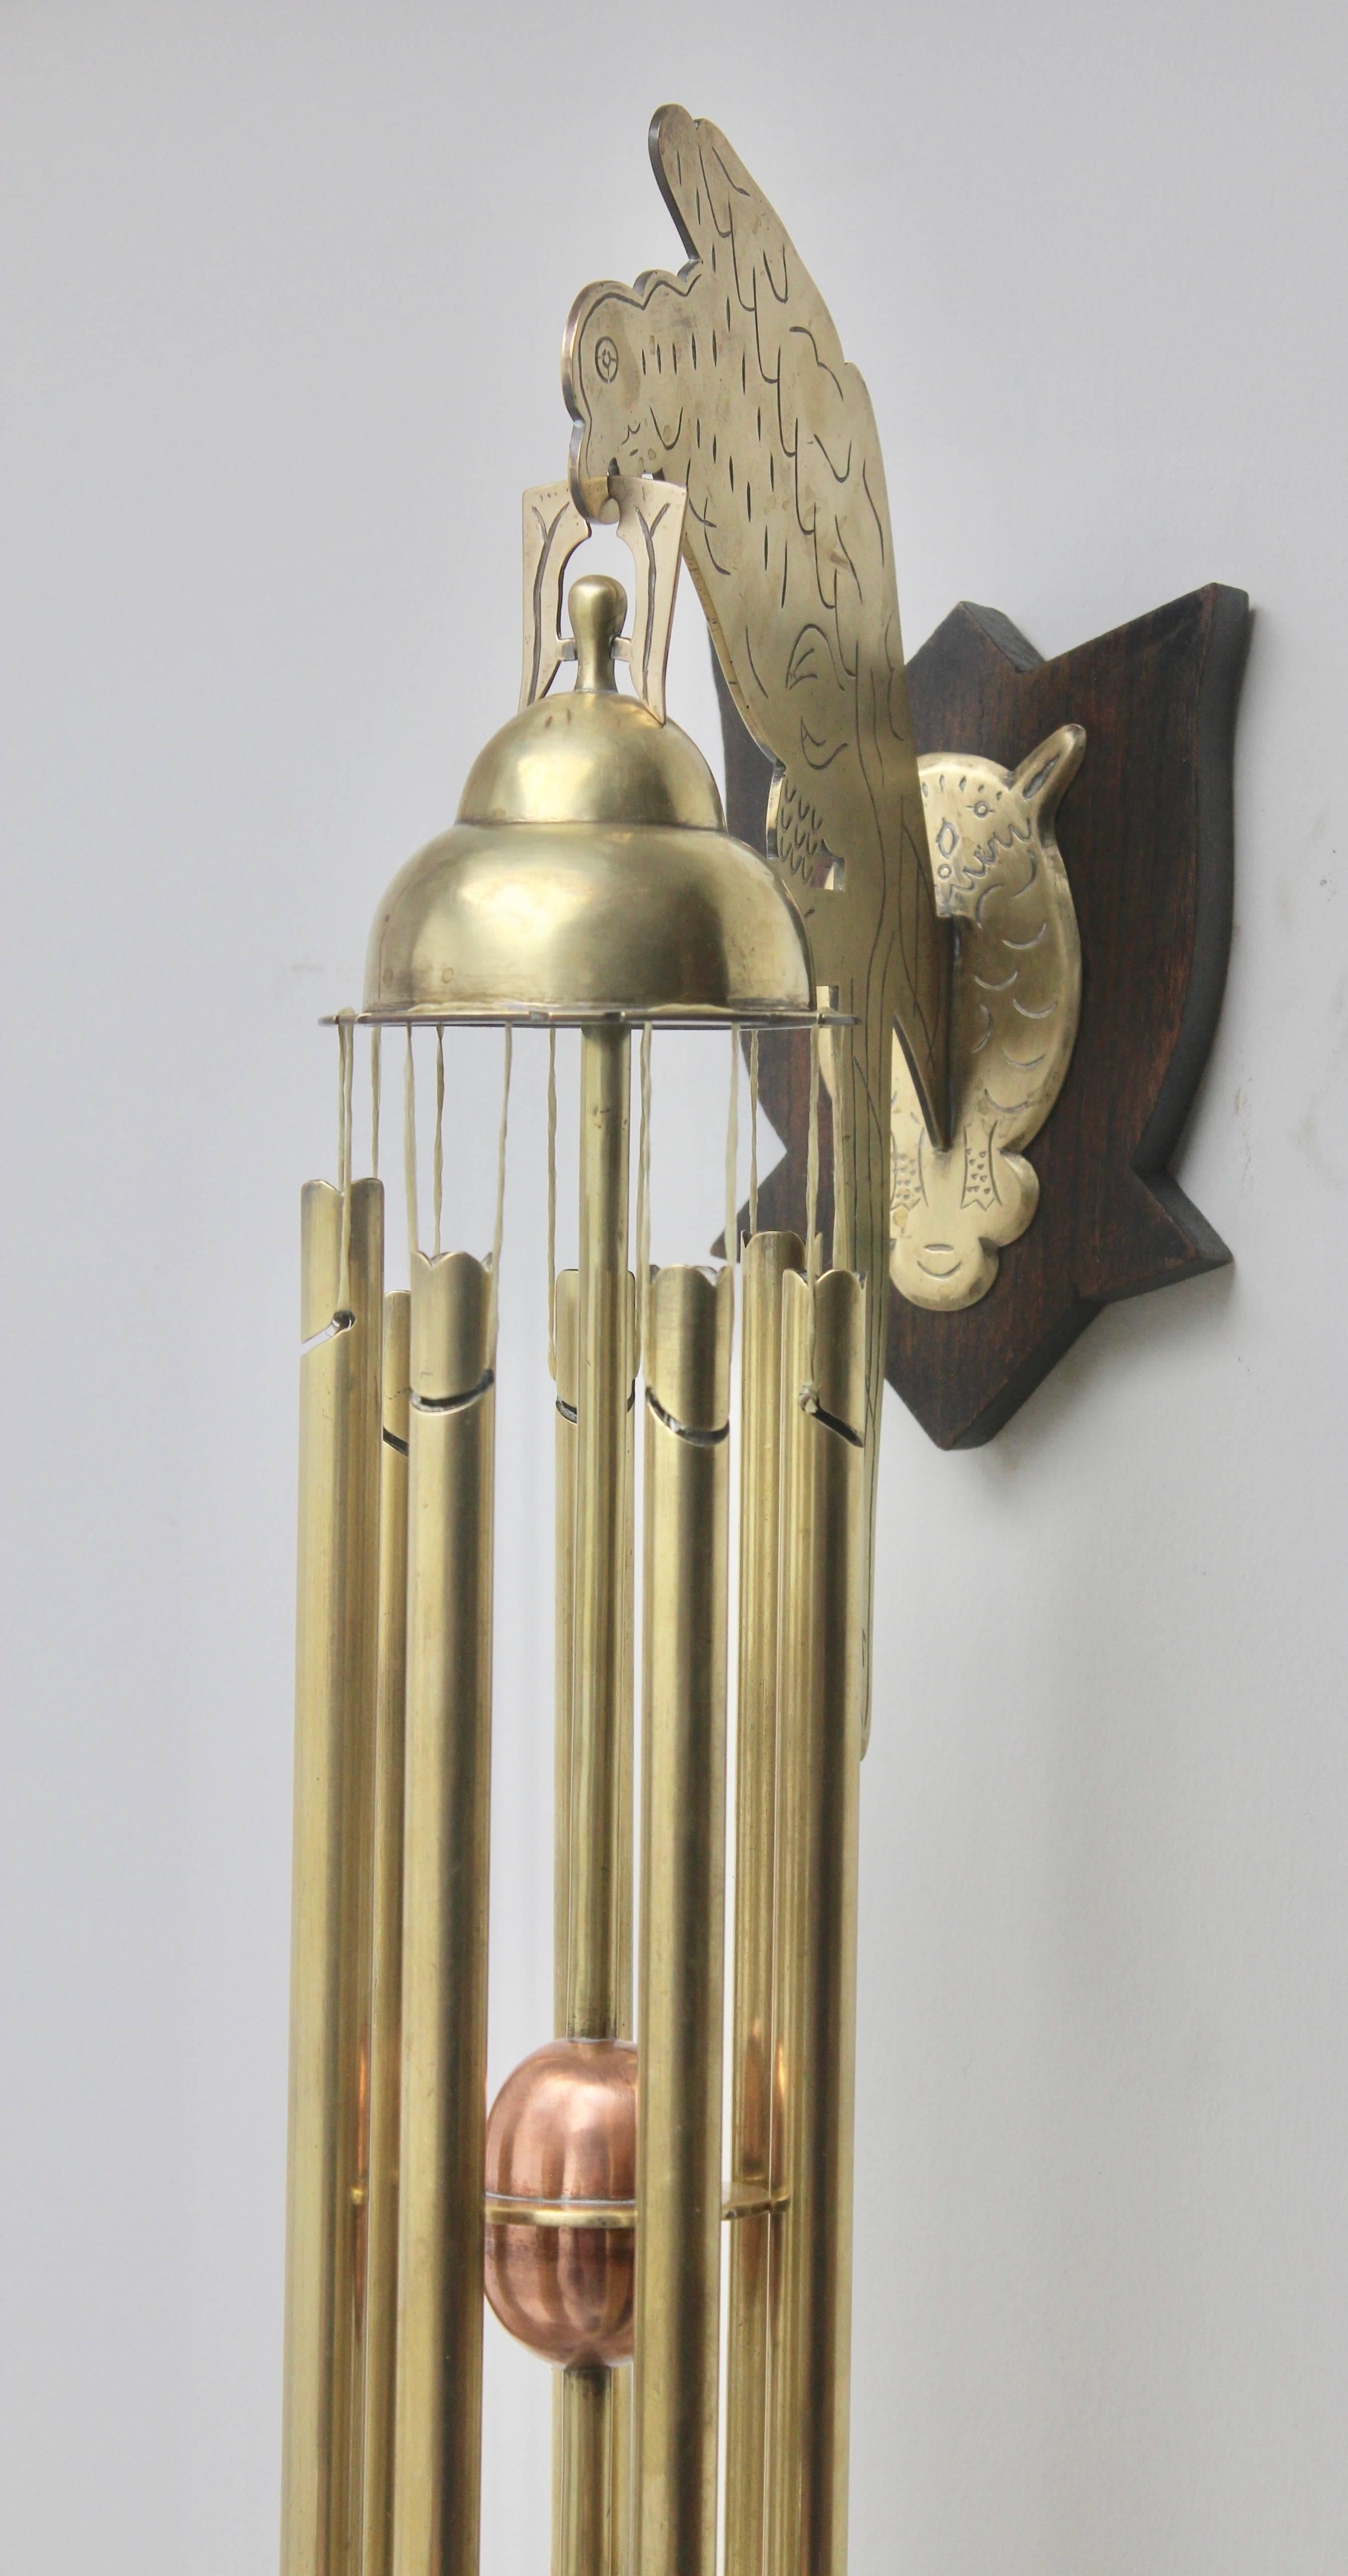 Arts and Crafts Arts & Crafts Chime Tubular Bells, Brass Wall-Mounted Dinner Gong ‘Doorbell’ For Sale